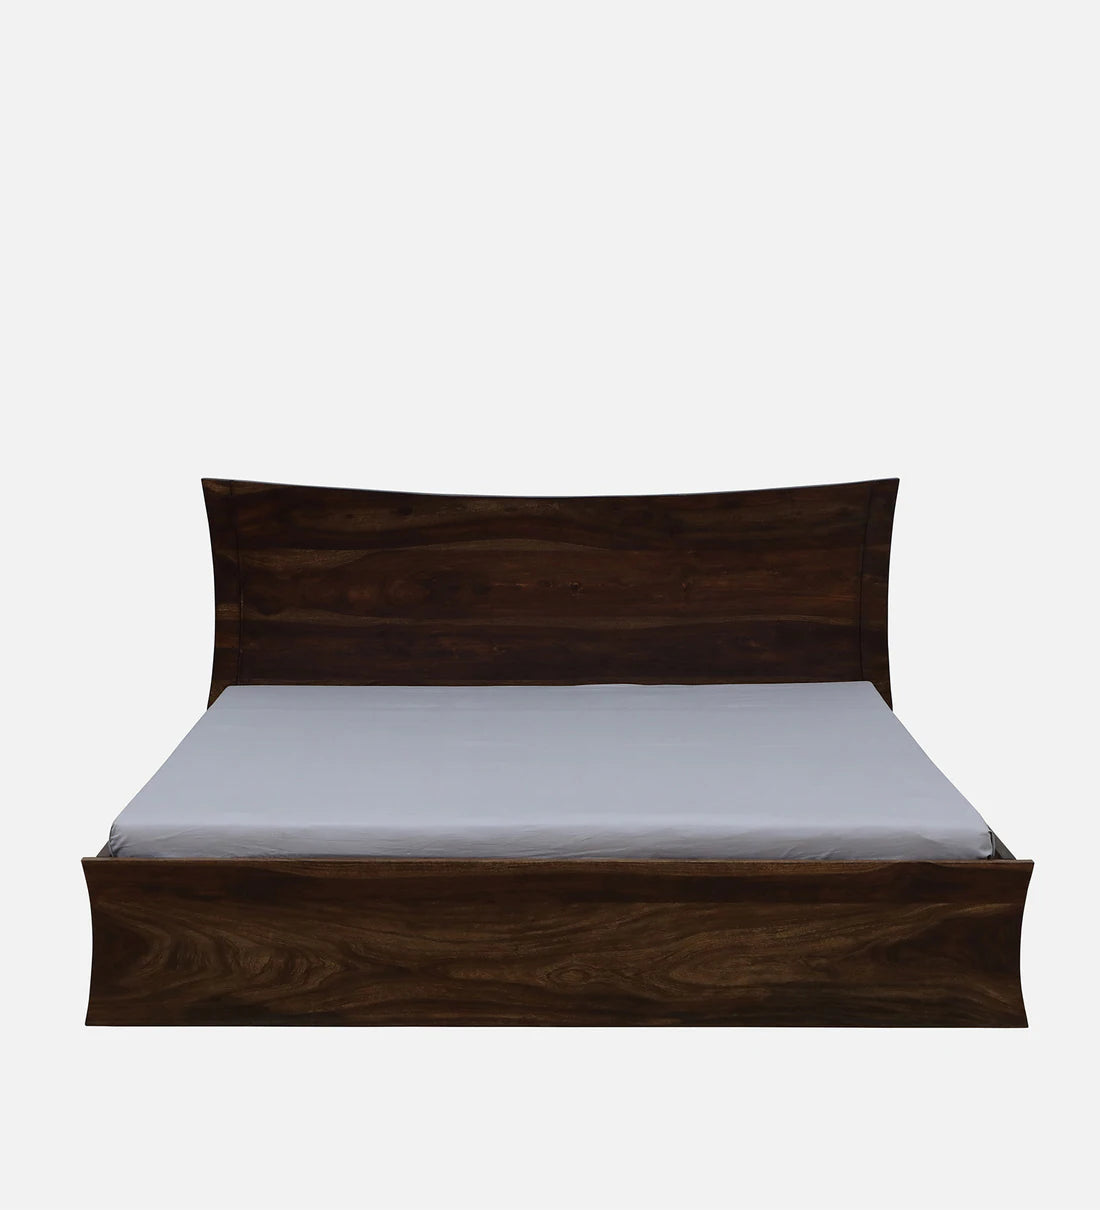 Sheesham Wood King Size Bed In Provincial Teak Finish With Drawer Storage